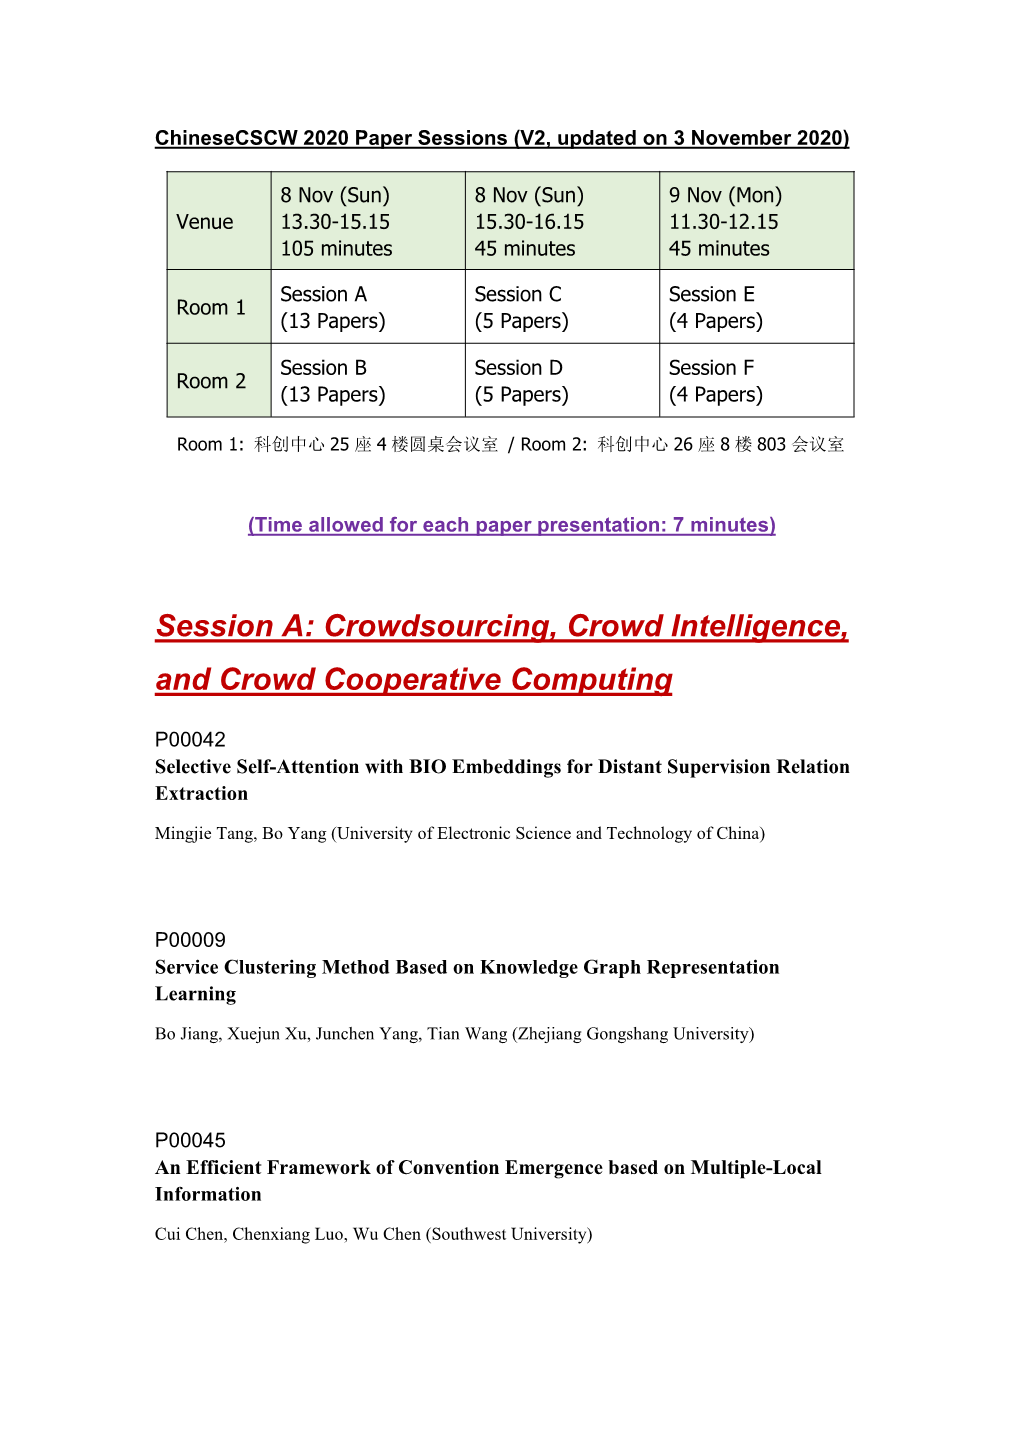 Session A: Crowdsourcing, Crowd Intelligence, and Crowd Cooperative Computing